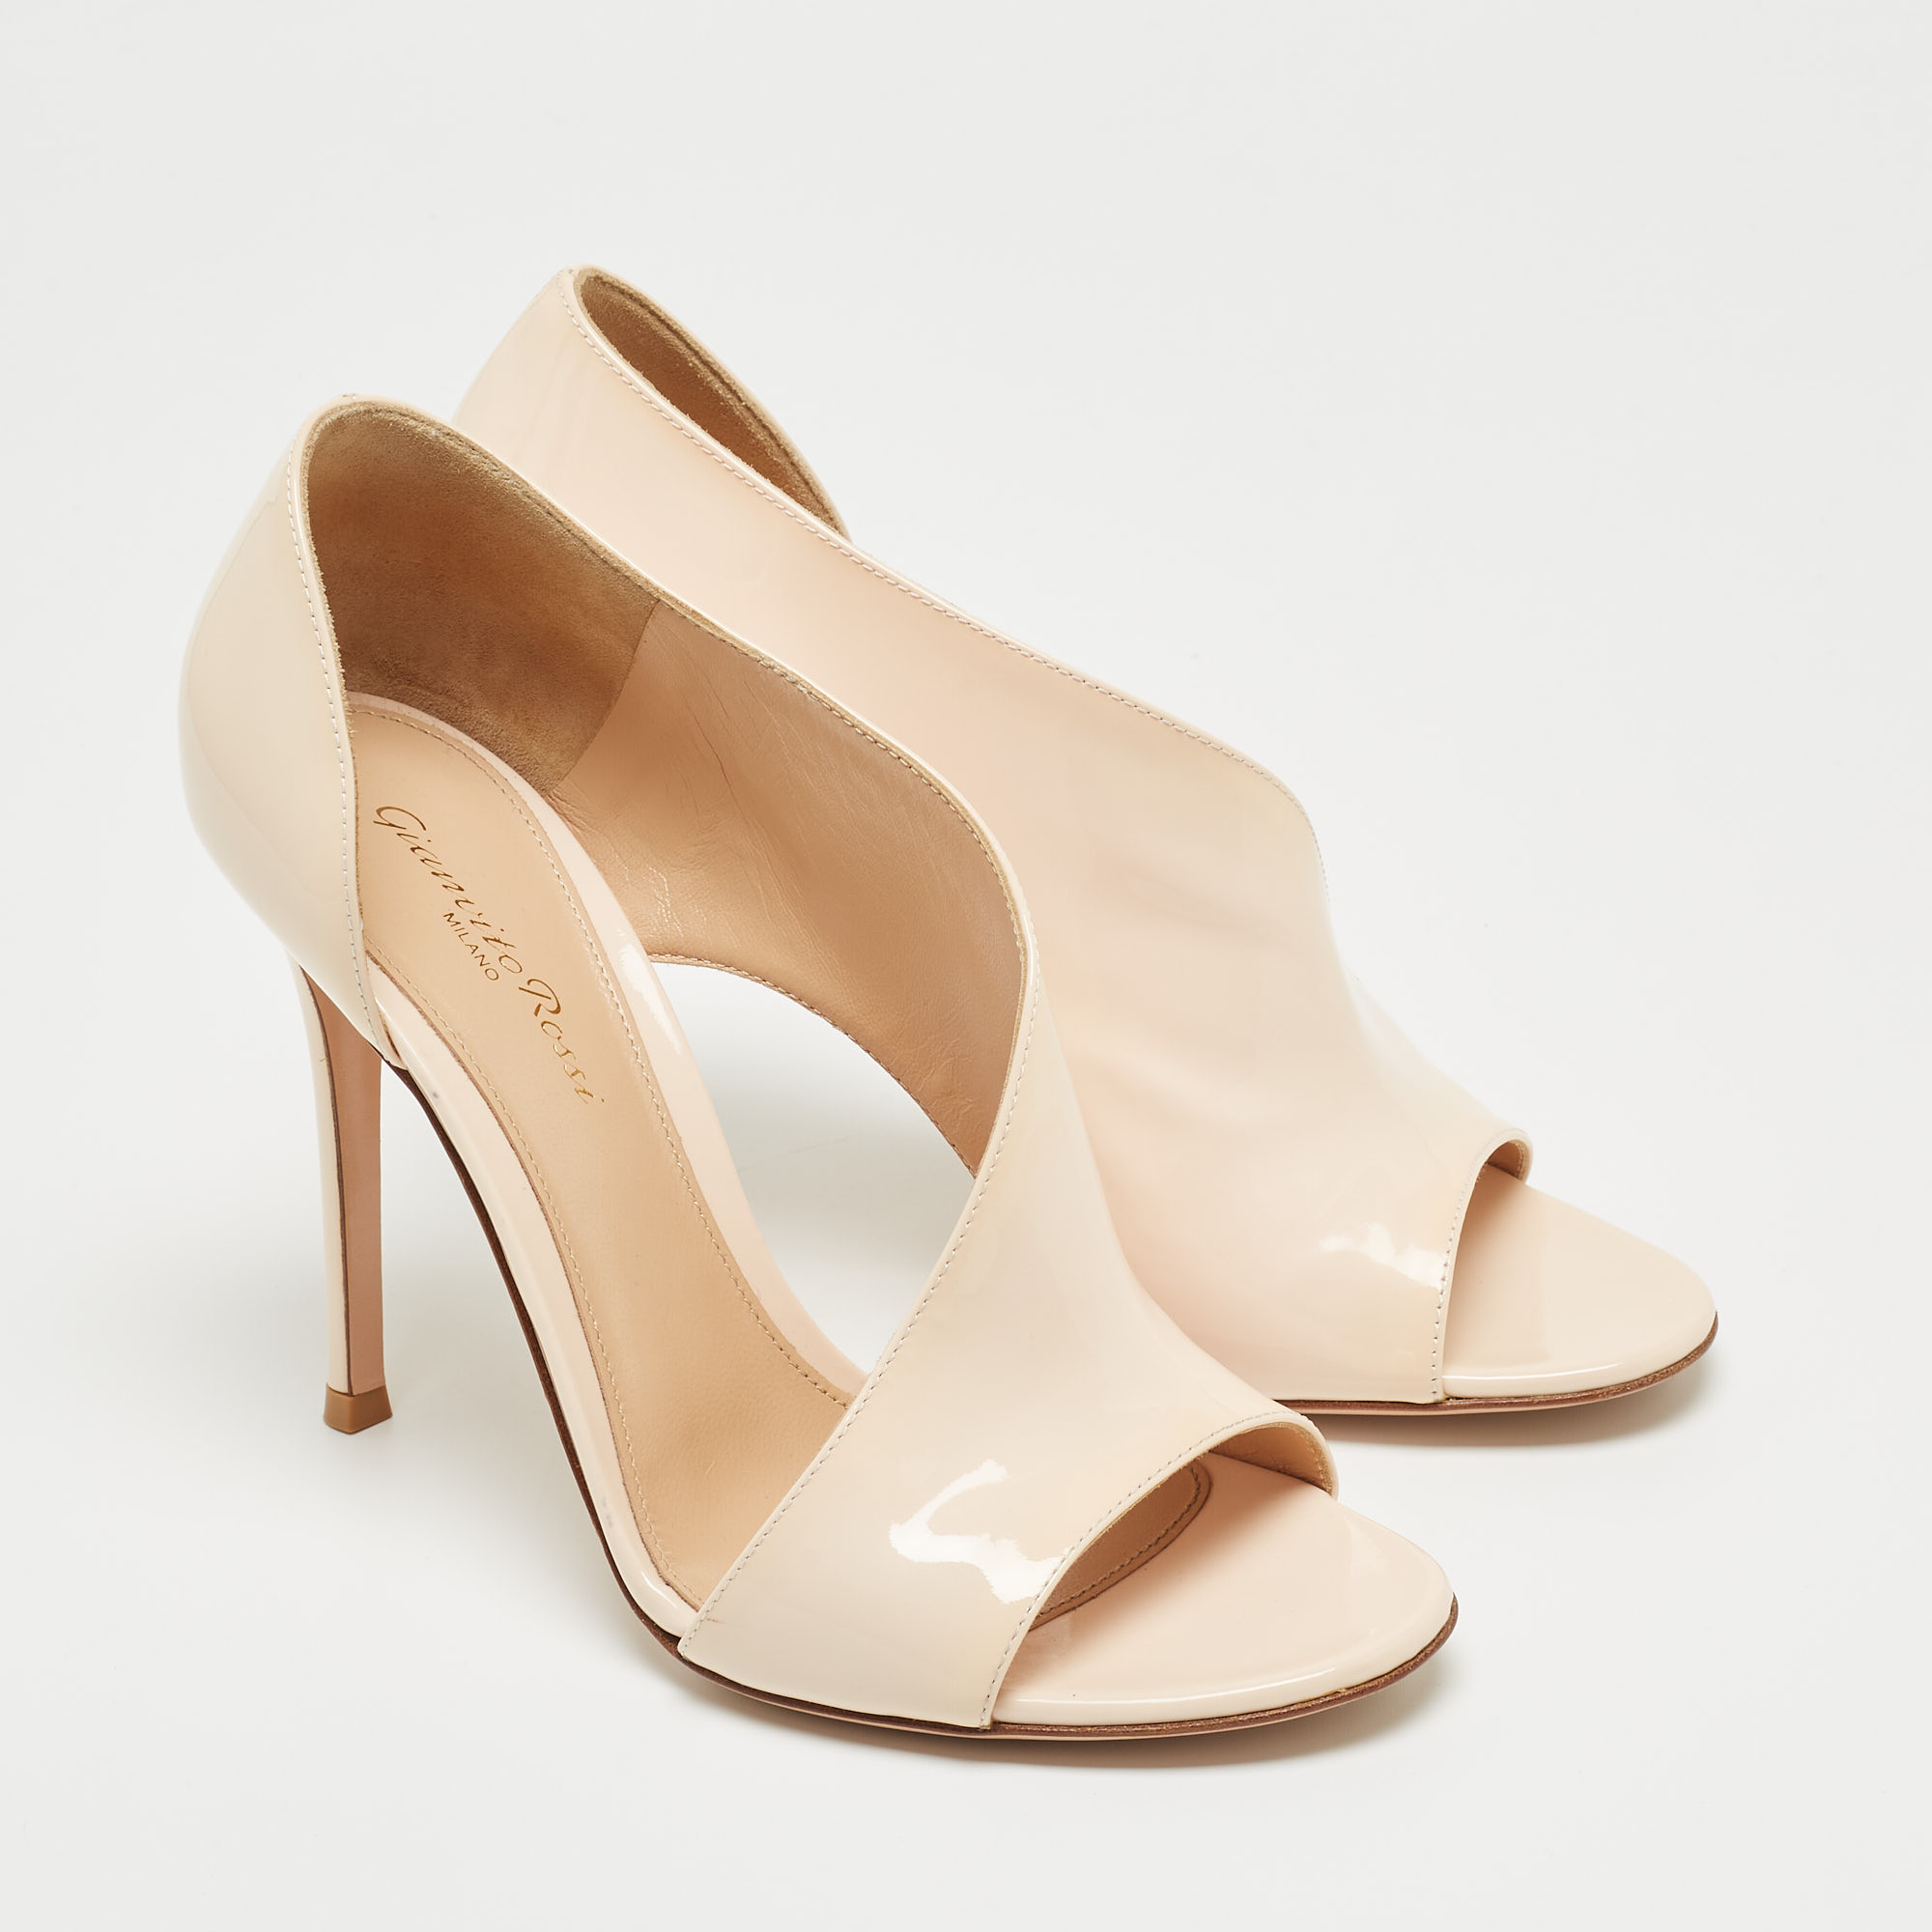 Gianvito Rossi Ivory Patent Asymmetic Heeled Pumps Size 38